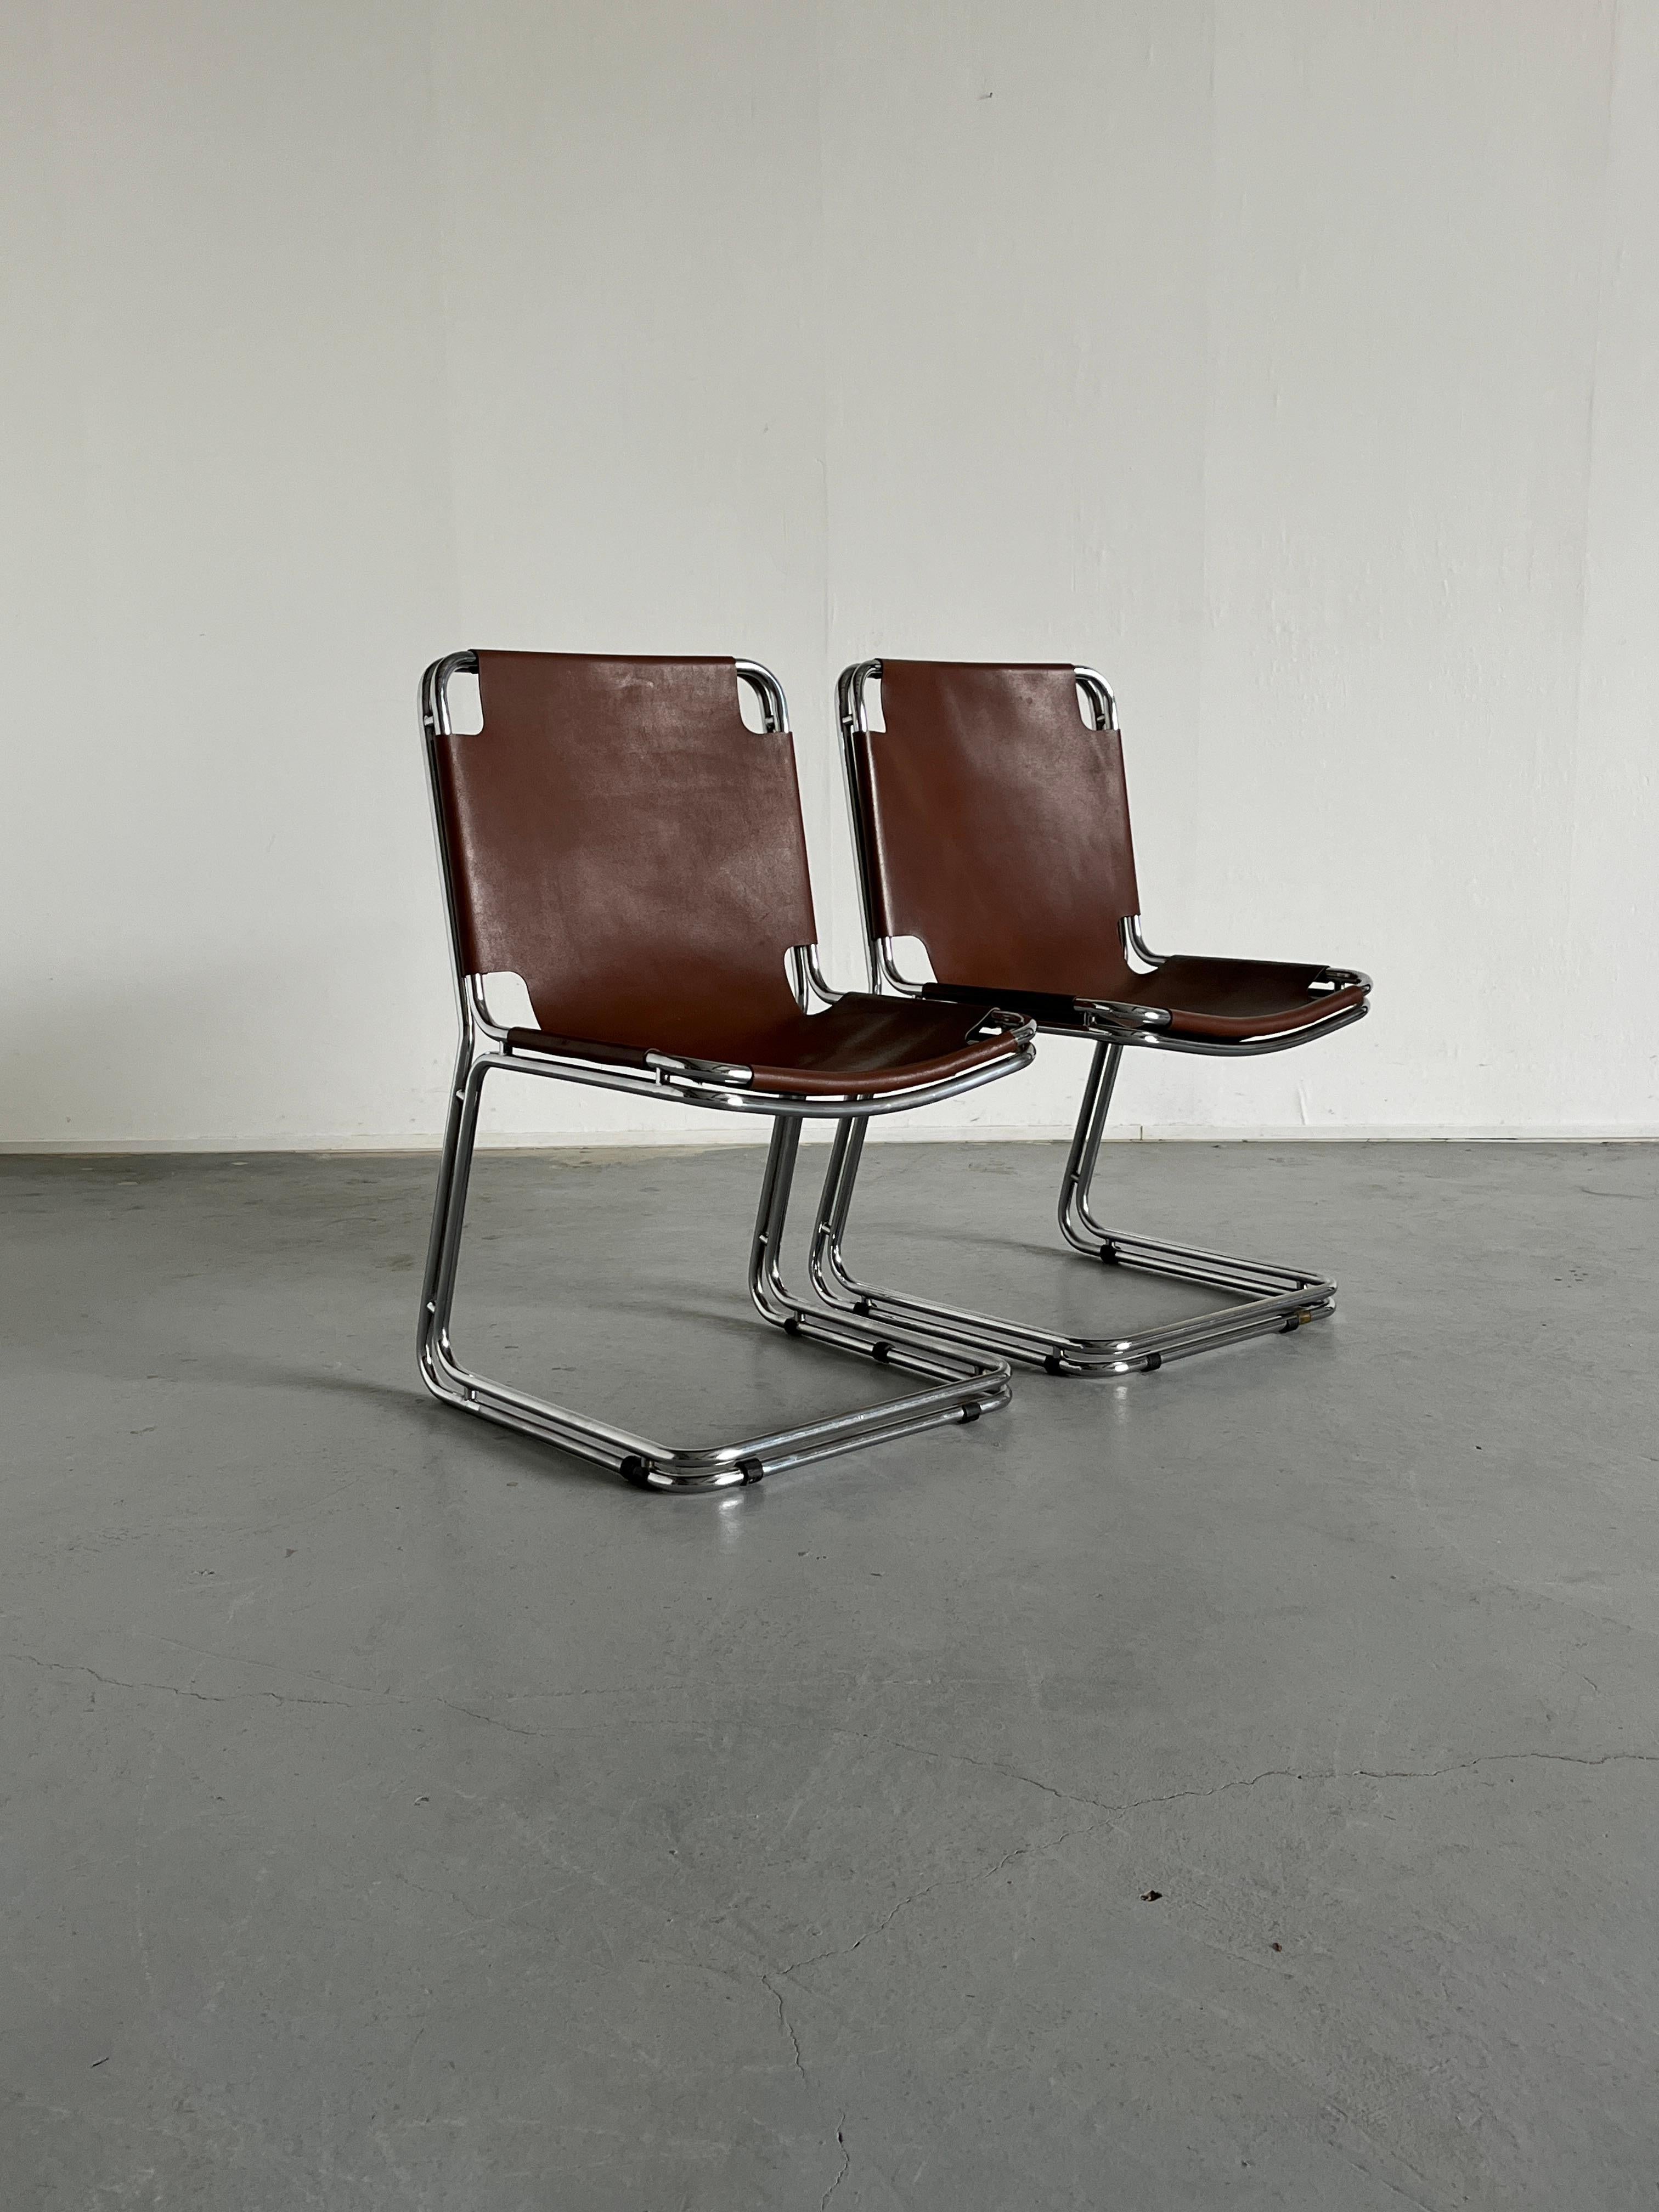 Pair of vintage Italian cantilever chairs made from a chromed metal base and saddle leather one-piece seating. In the style of Pascal Mourgue or Gastone Rinaldi.
High-quality Italian production of the 1980s.

Very good vintage condition with